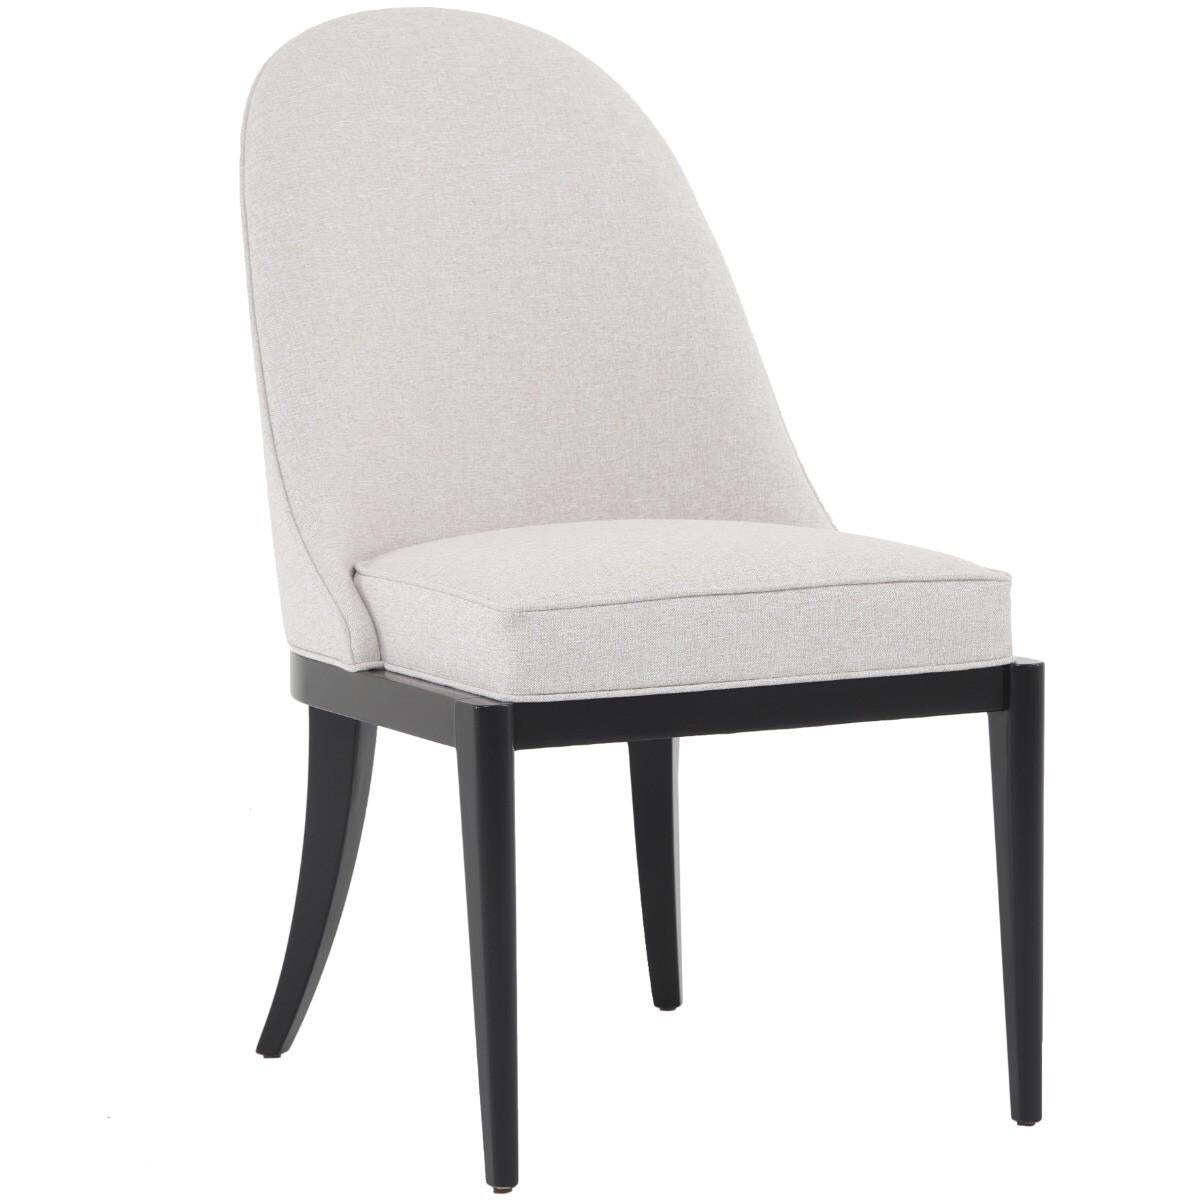 Caracole Classic Natural Choice Dining Chair - image 1